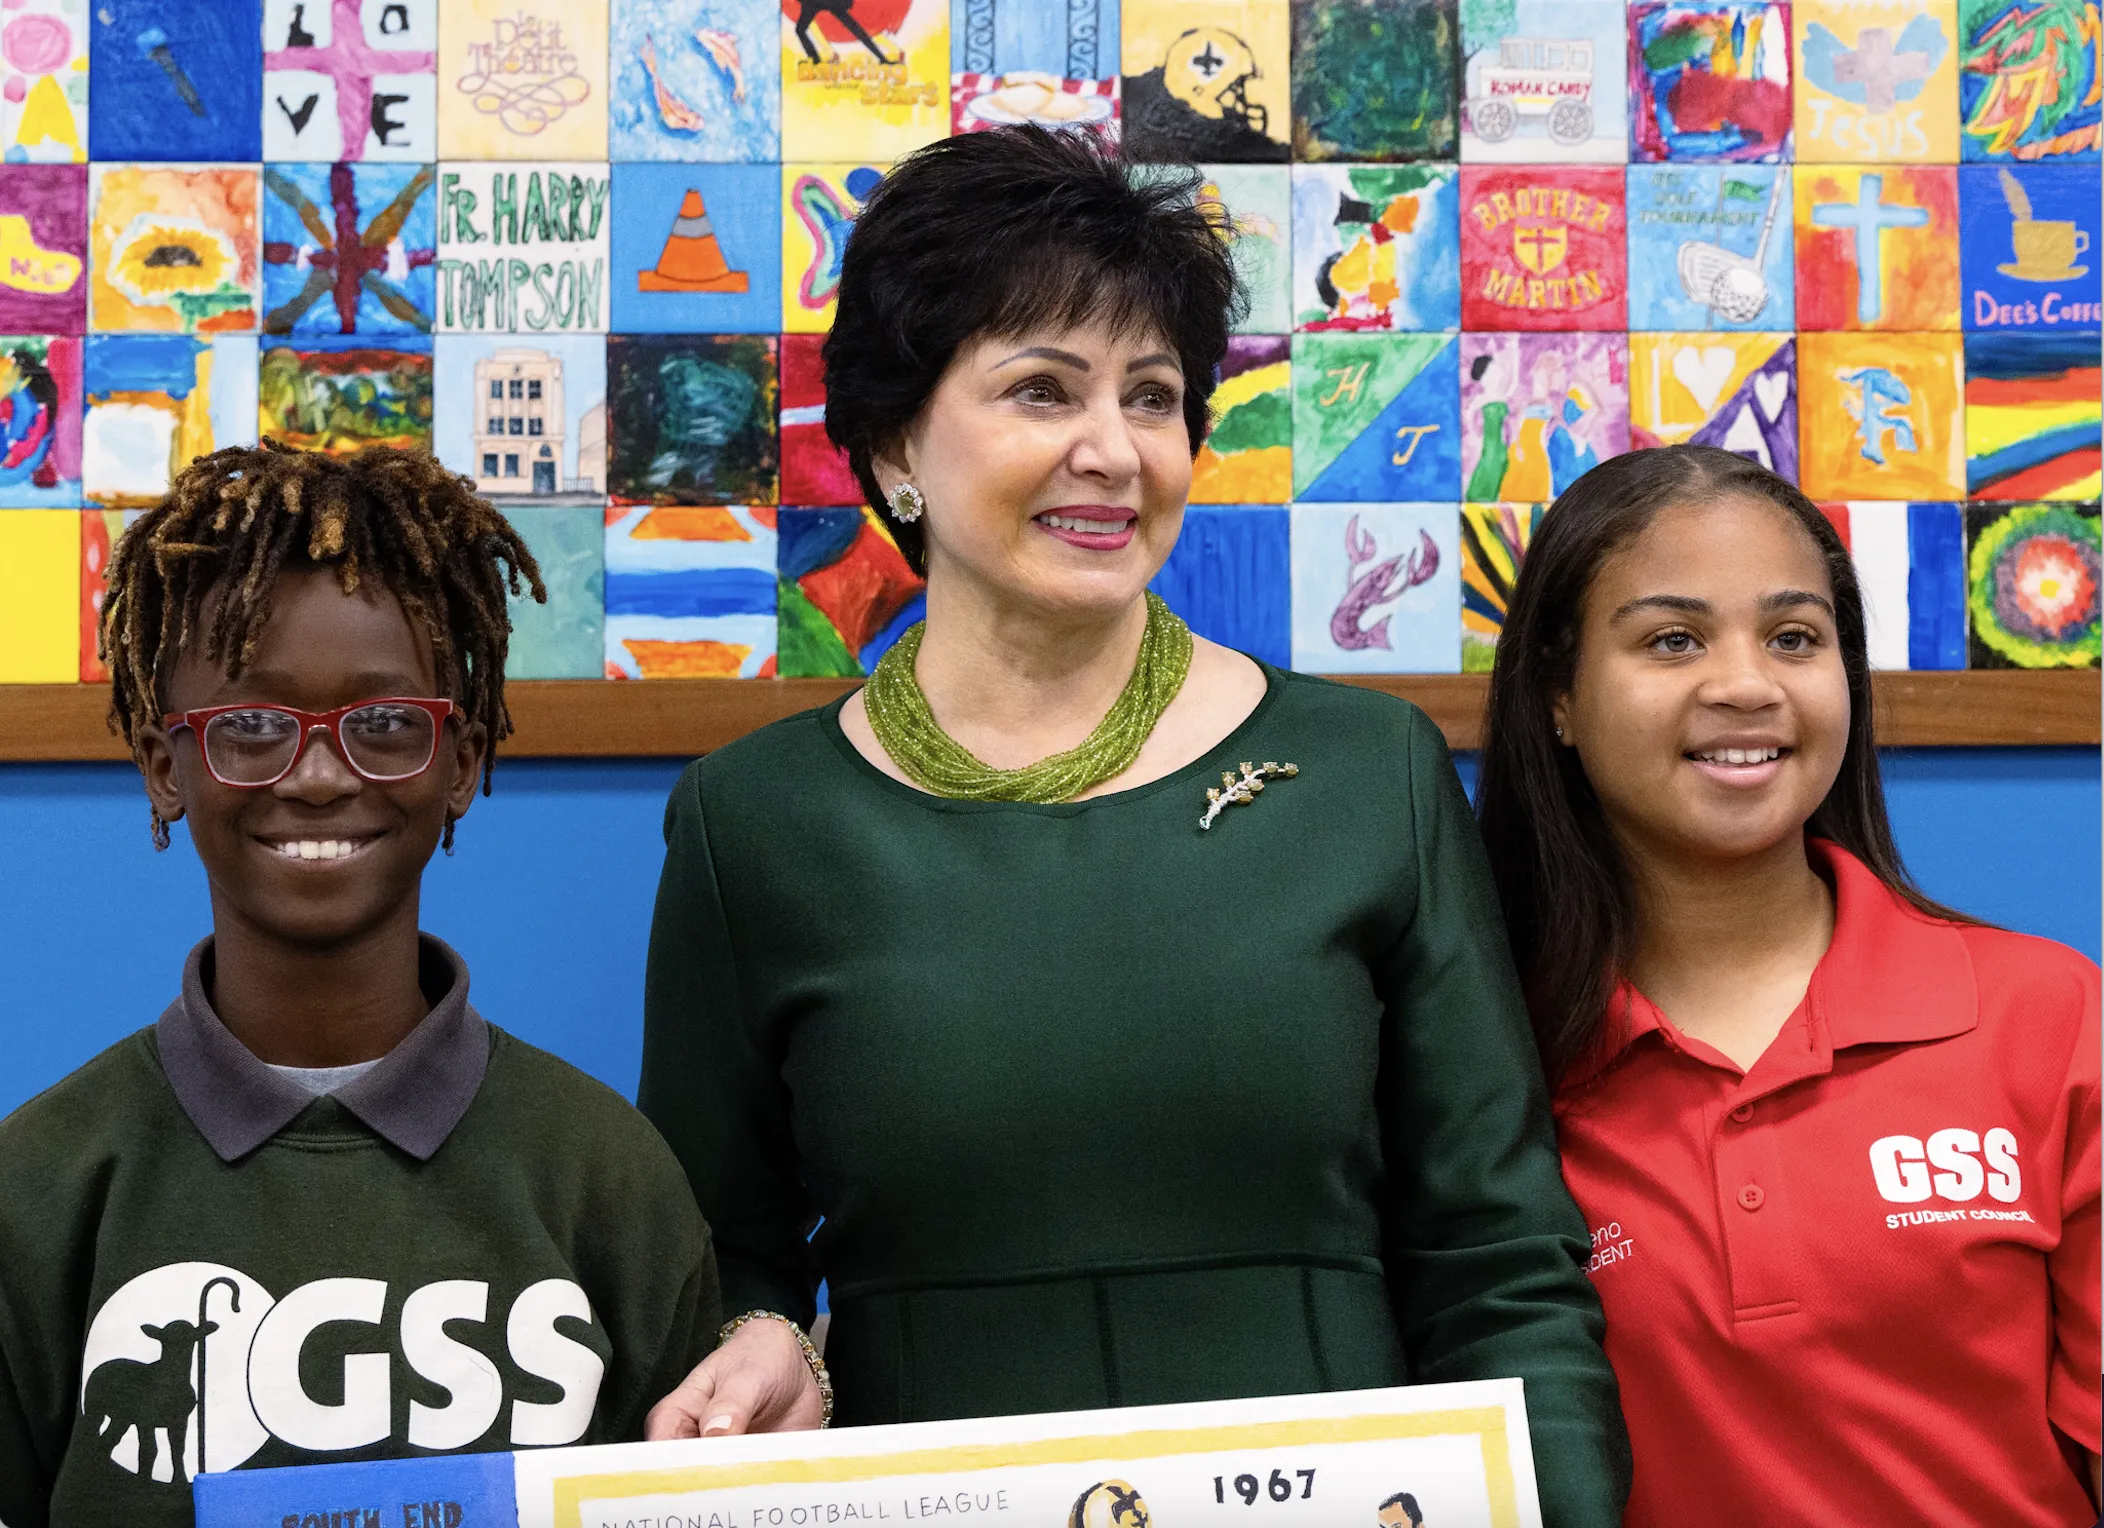 New Orleans Saints and Pelicans owner Gayle Benson pictured with two students at Good Shepherd School in New Orleans, where she announced her decision to give a large donation to fund the opening of a second school in December 2023.?w=200&h=150